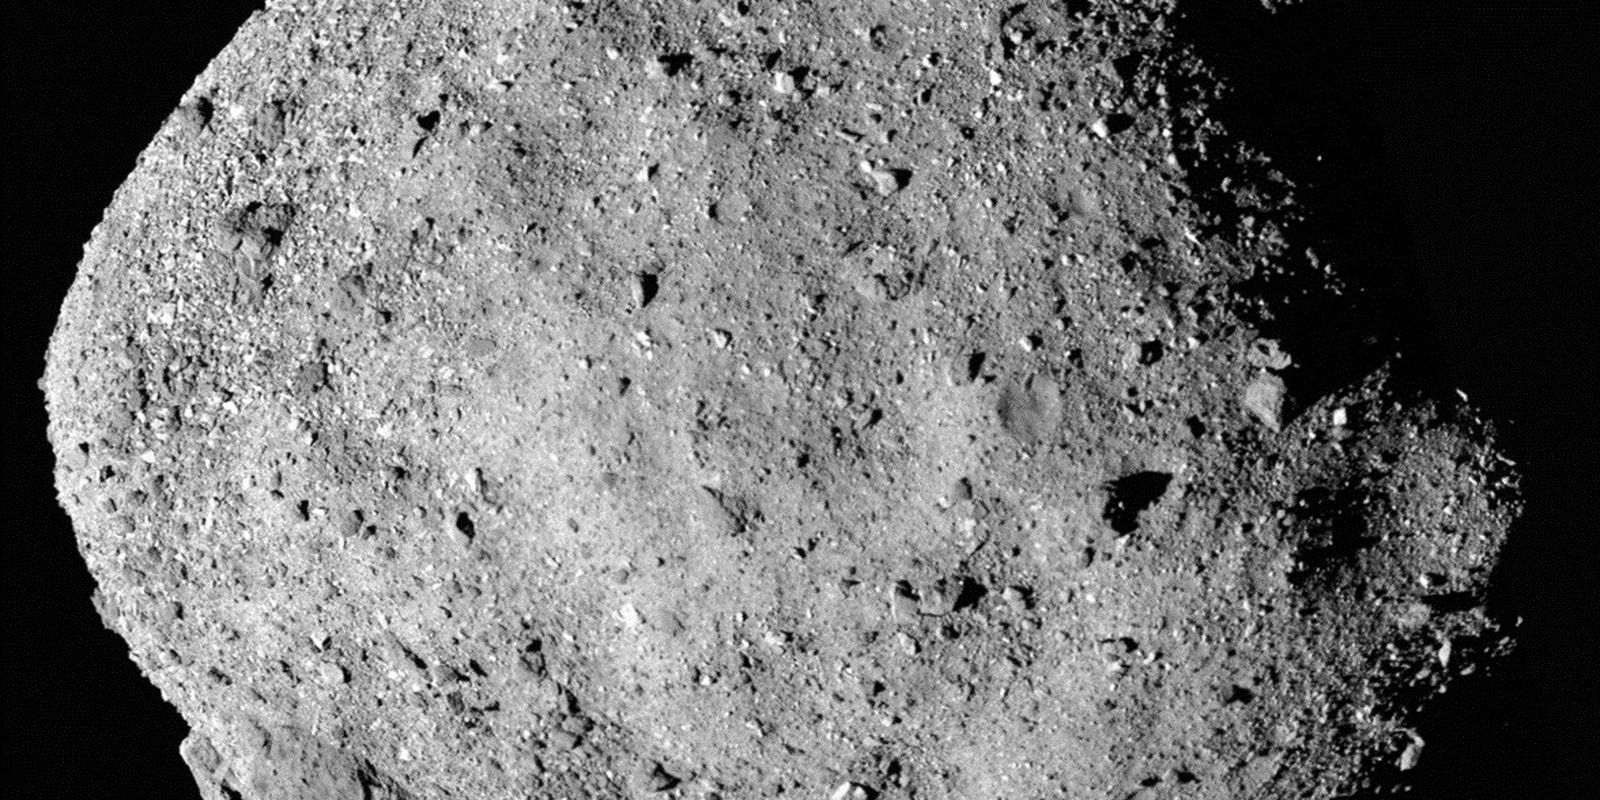 Three years after it was collected, the asteroid sample is scheduled to reach Earth on Sunday